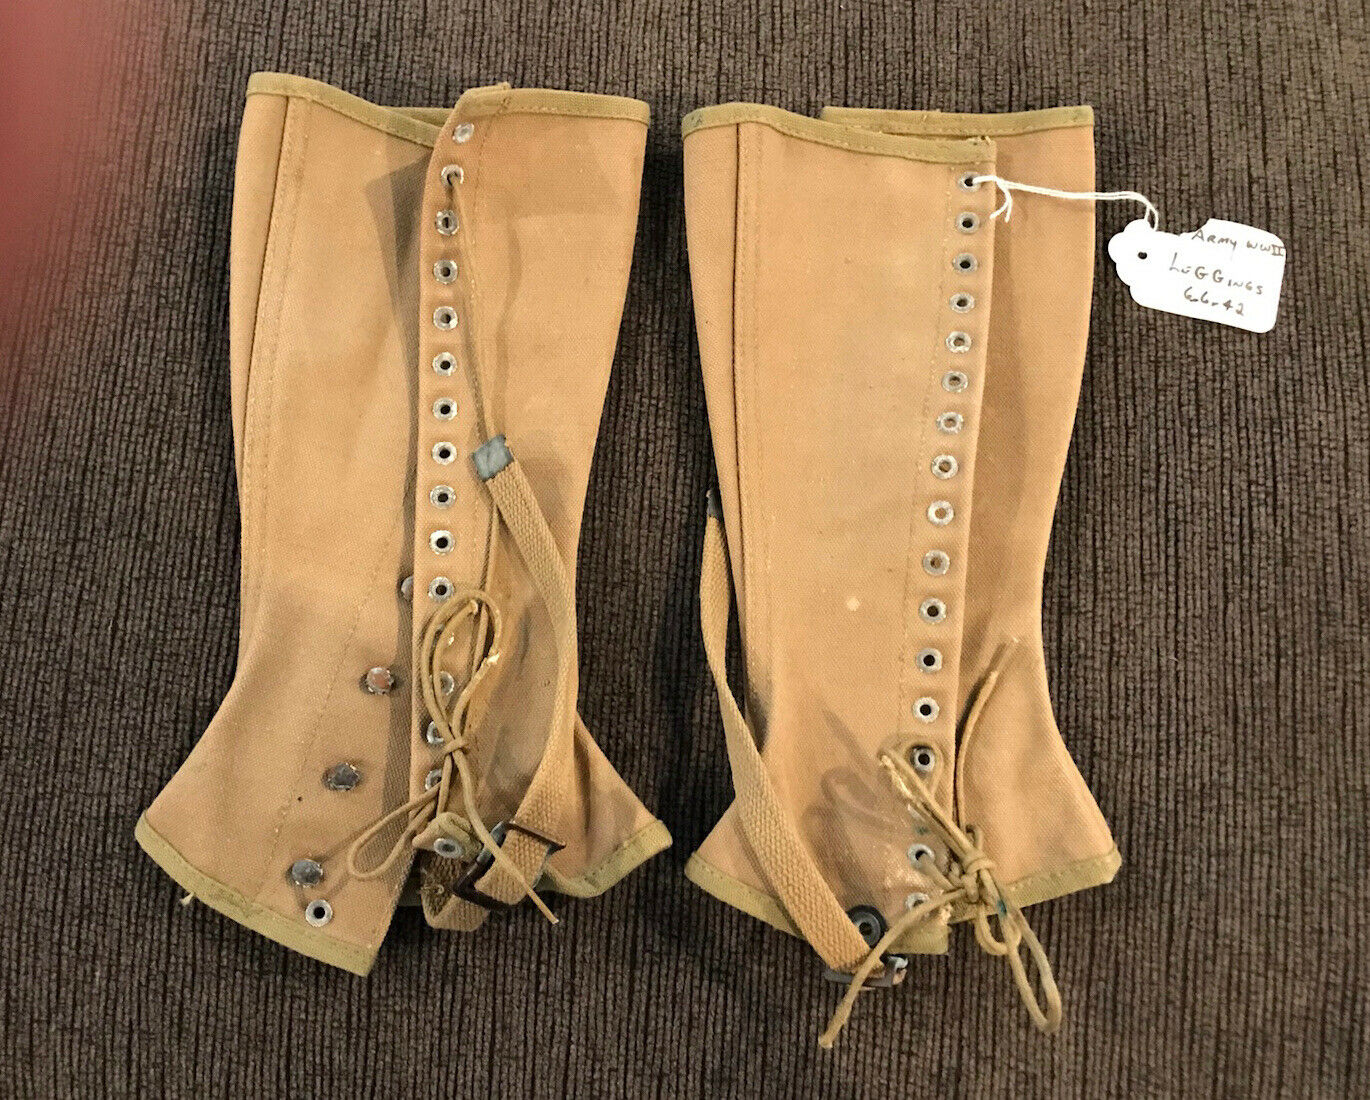 Old 1942 Tan Canvas  Army Boot Spats Gaiters Legging Set Ww2